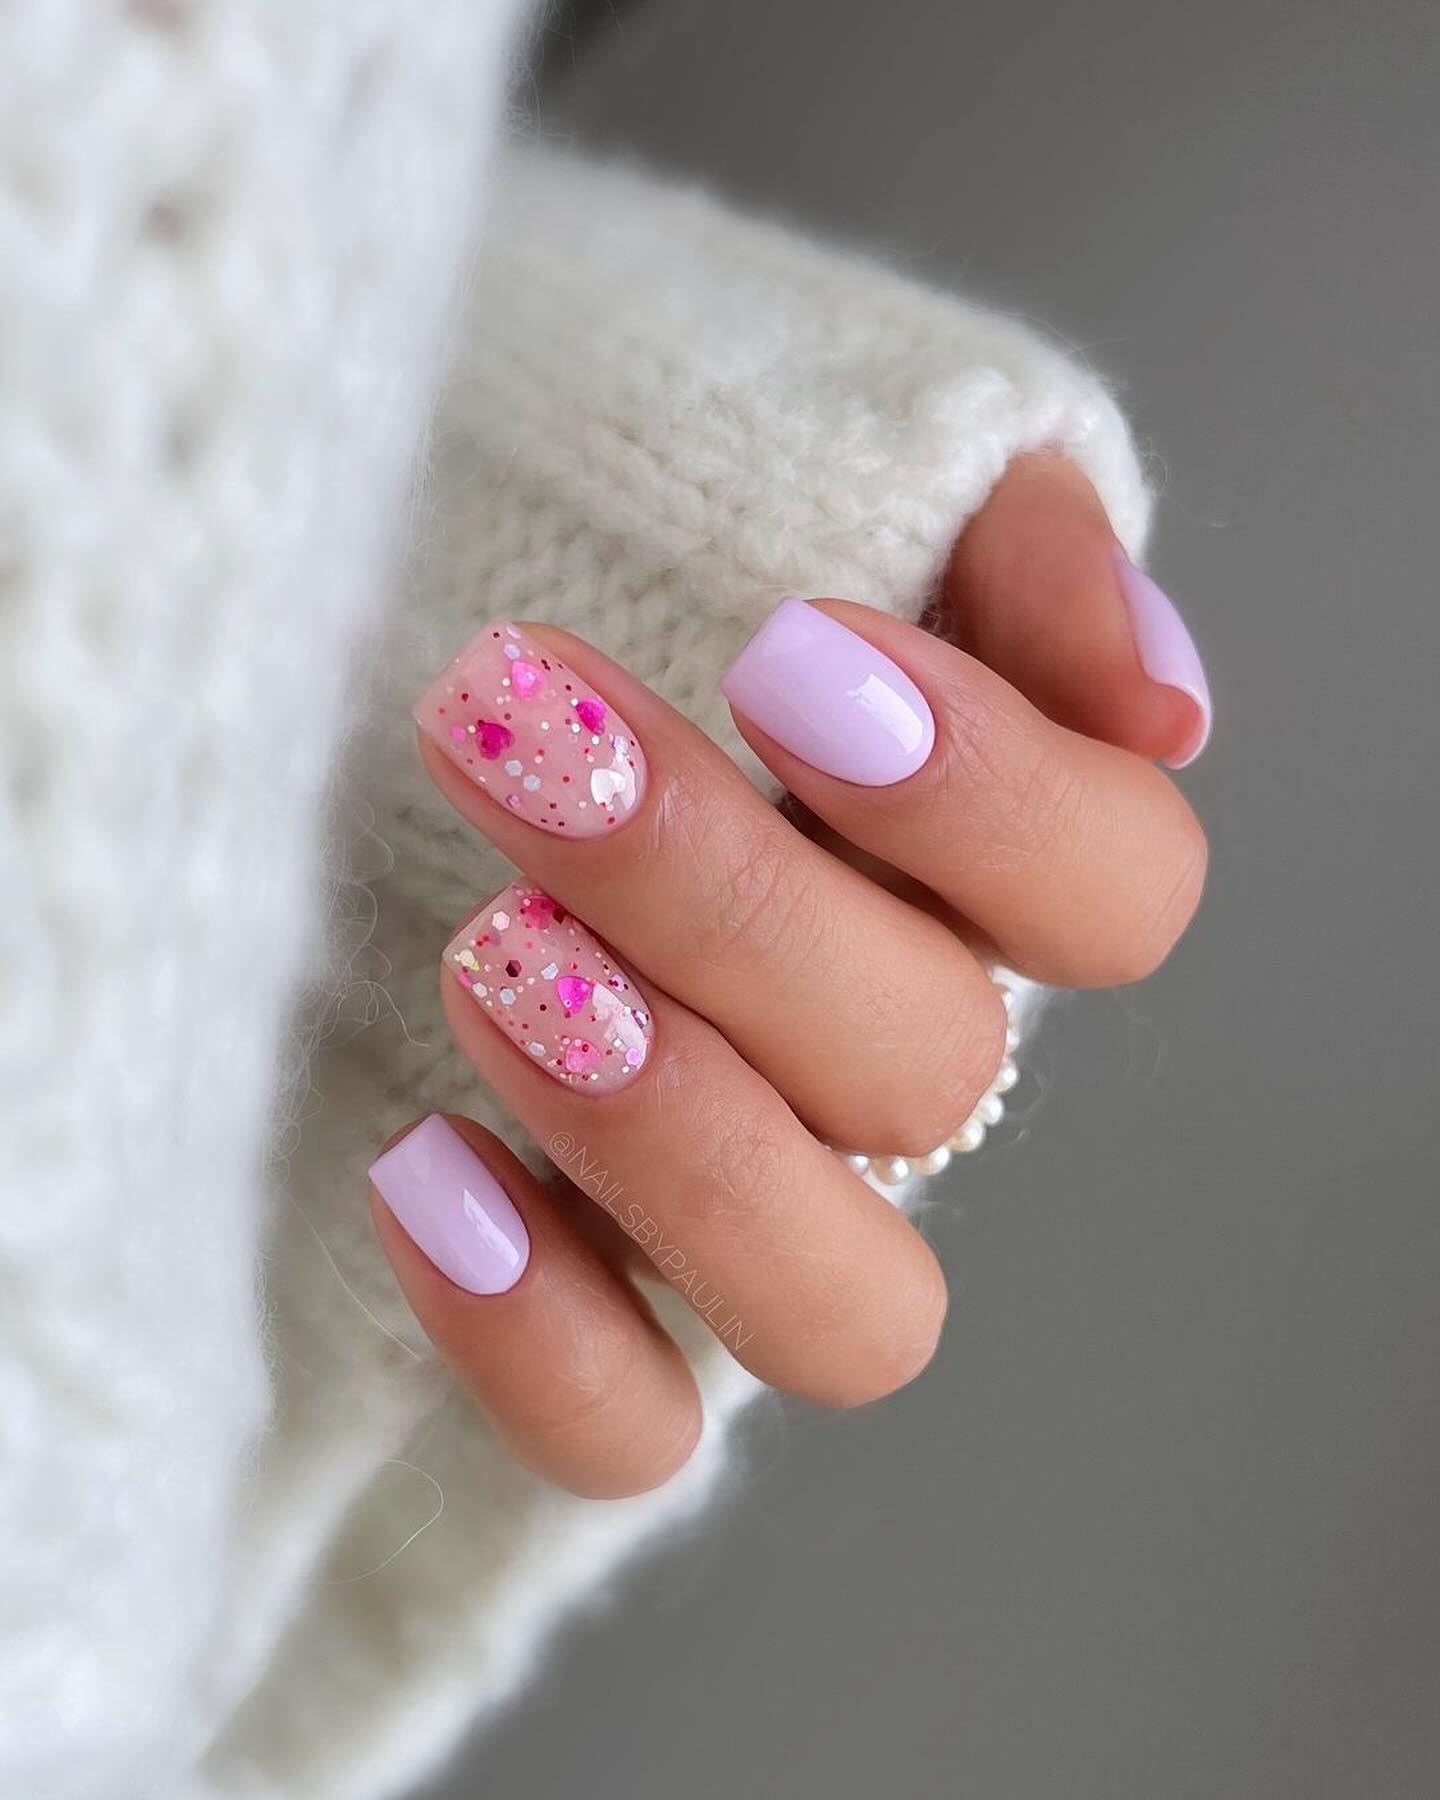 100 Pretty Spring Nail Designs To Try This Year images 95